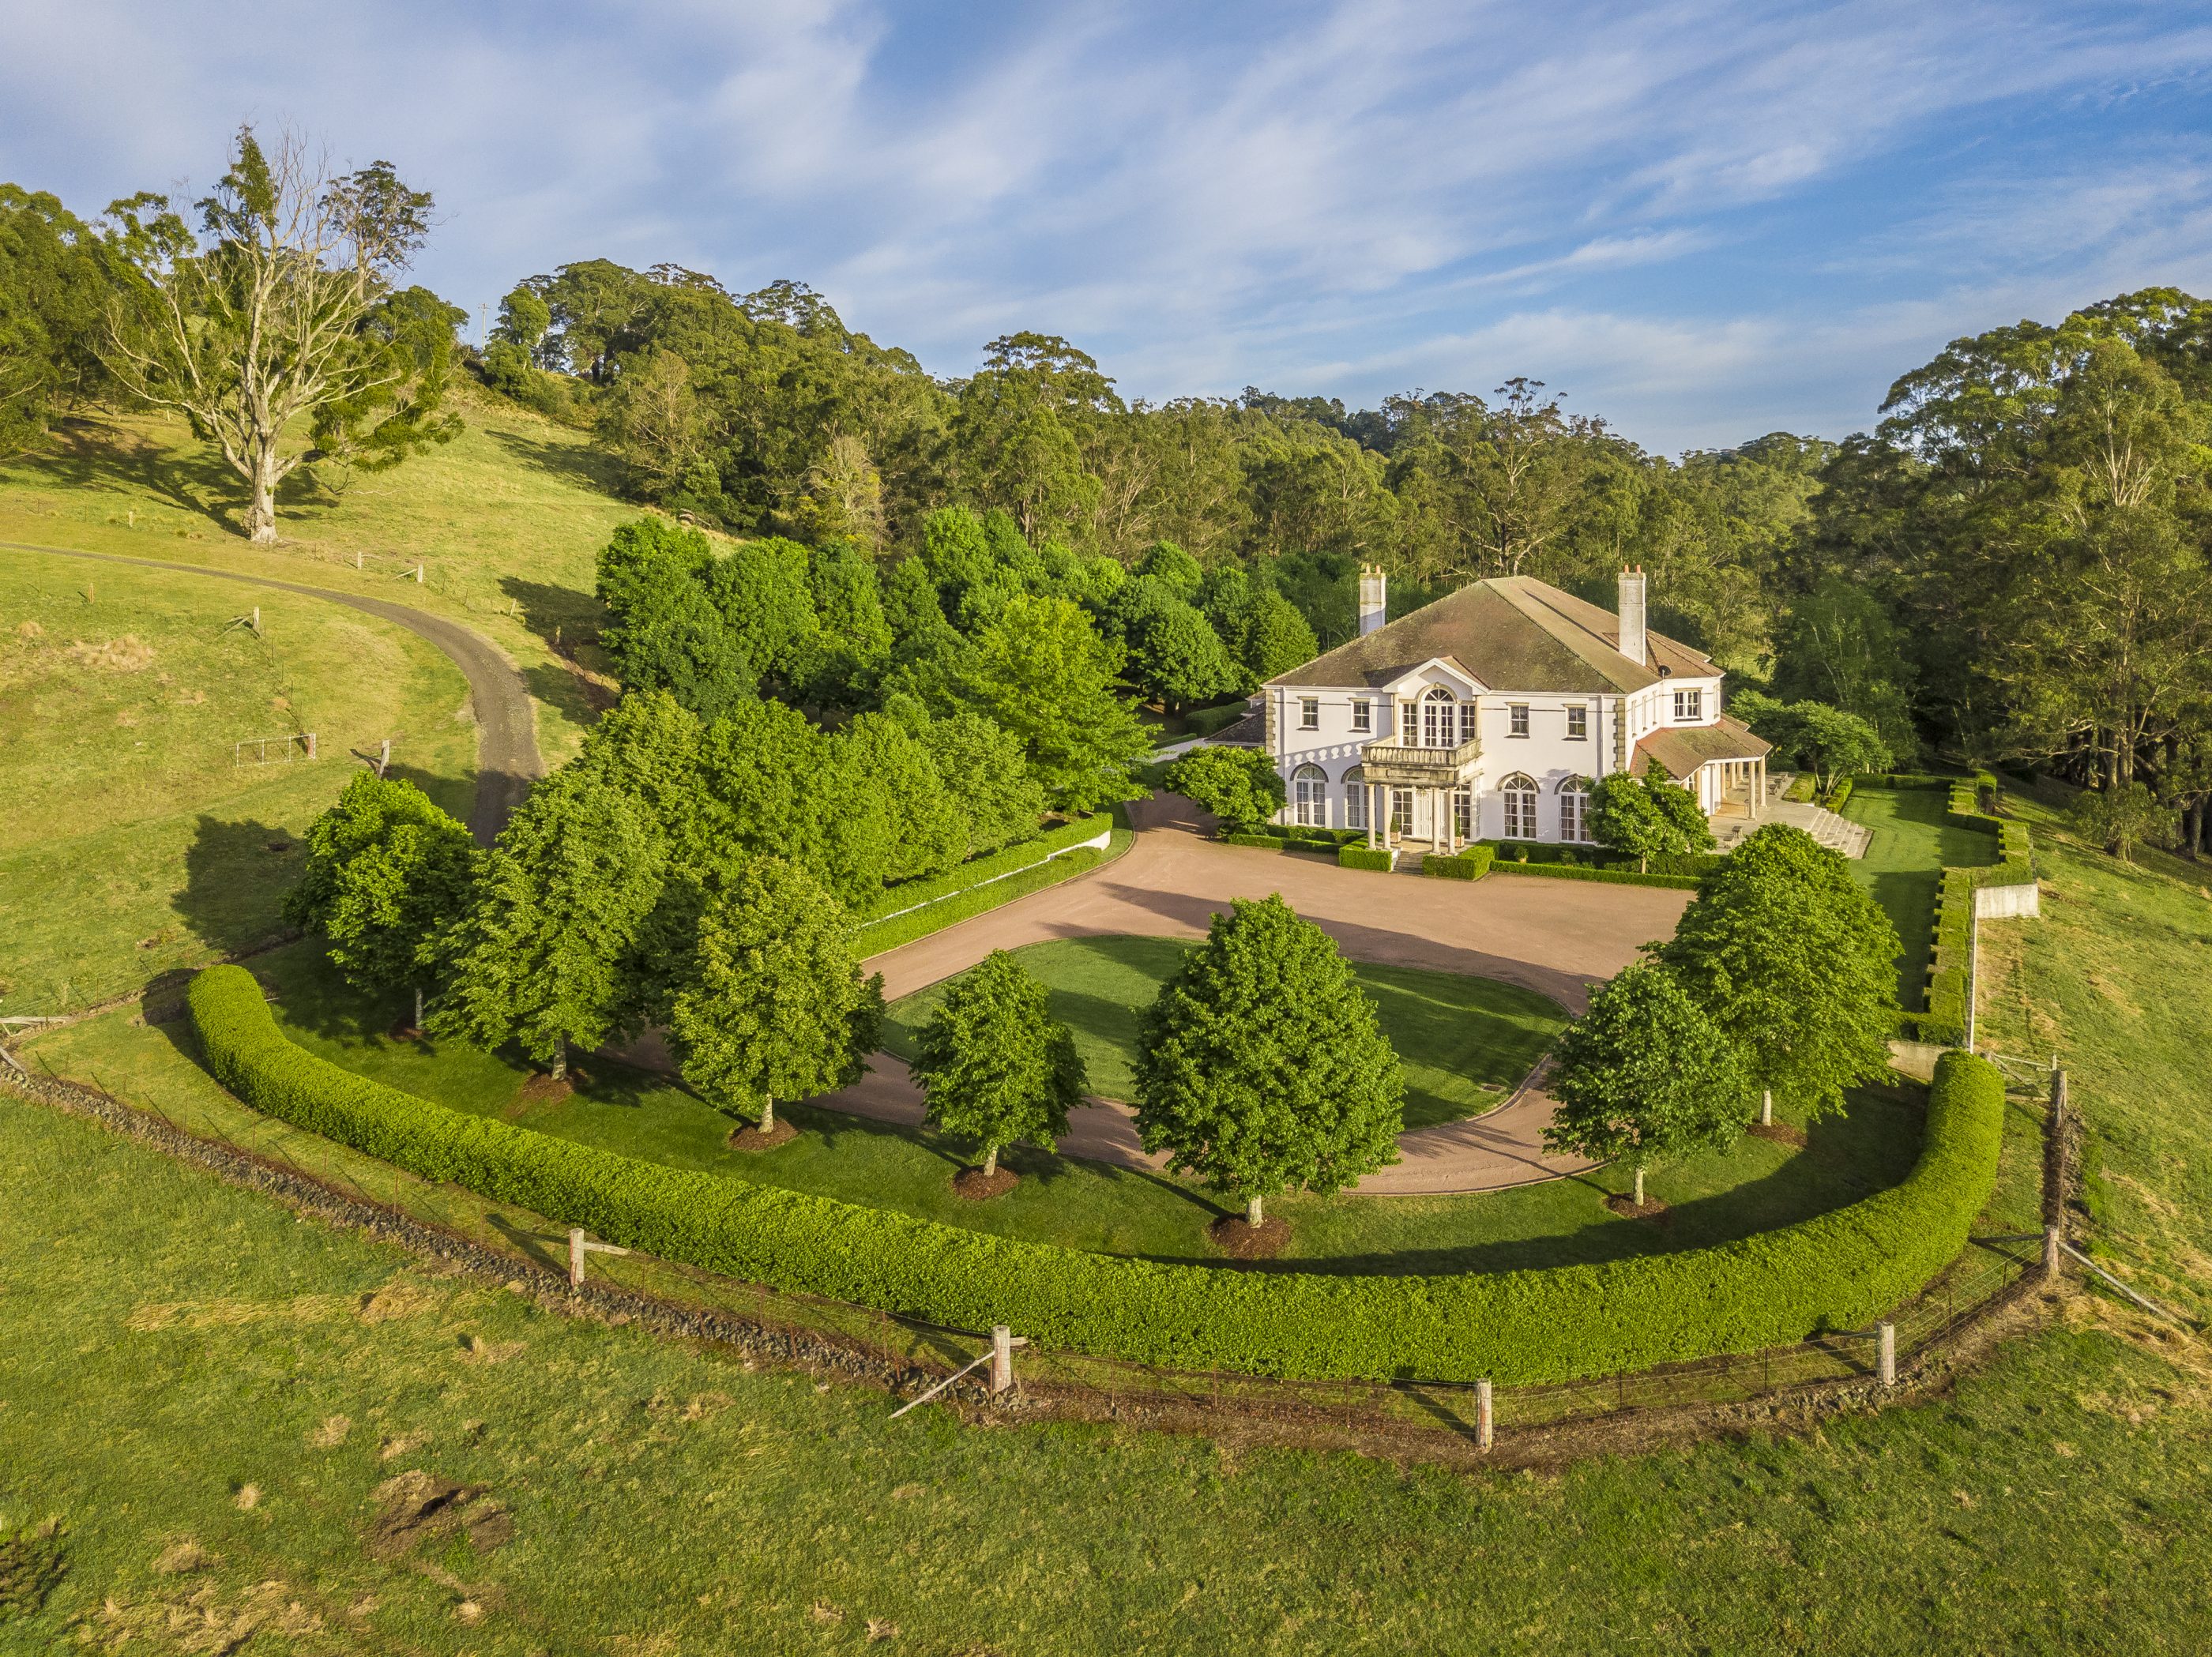 Grand mansion for sale in the Southern Highlands exudes rural romanticism